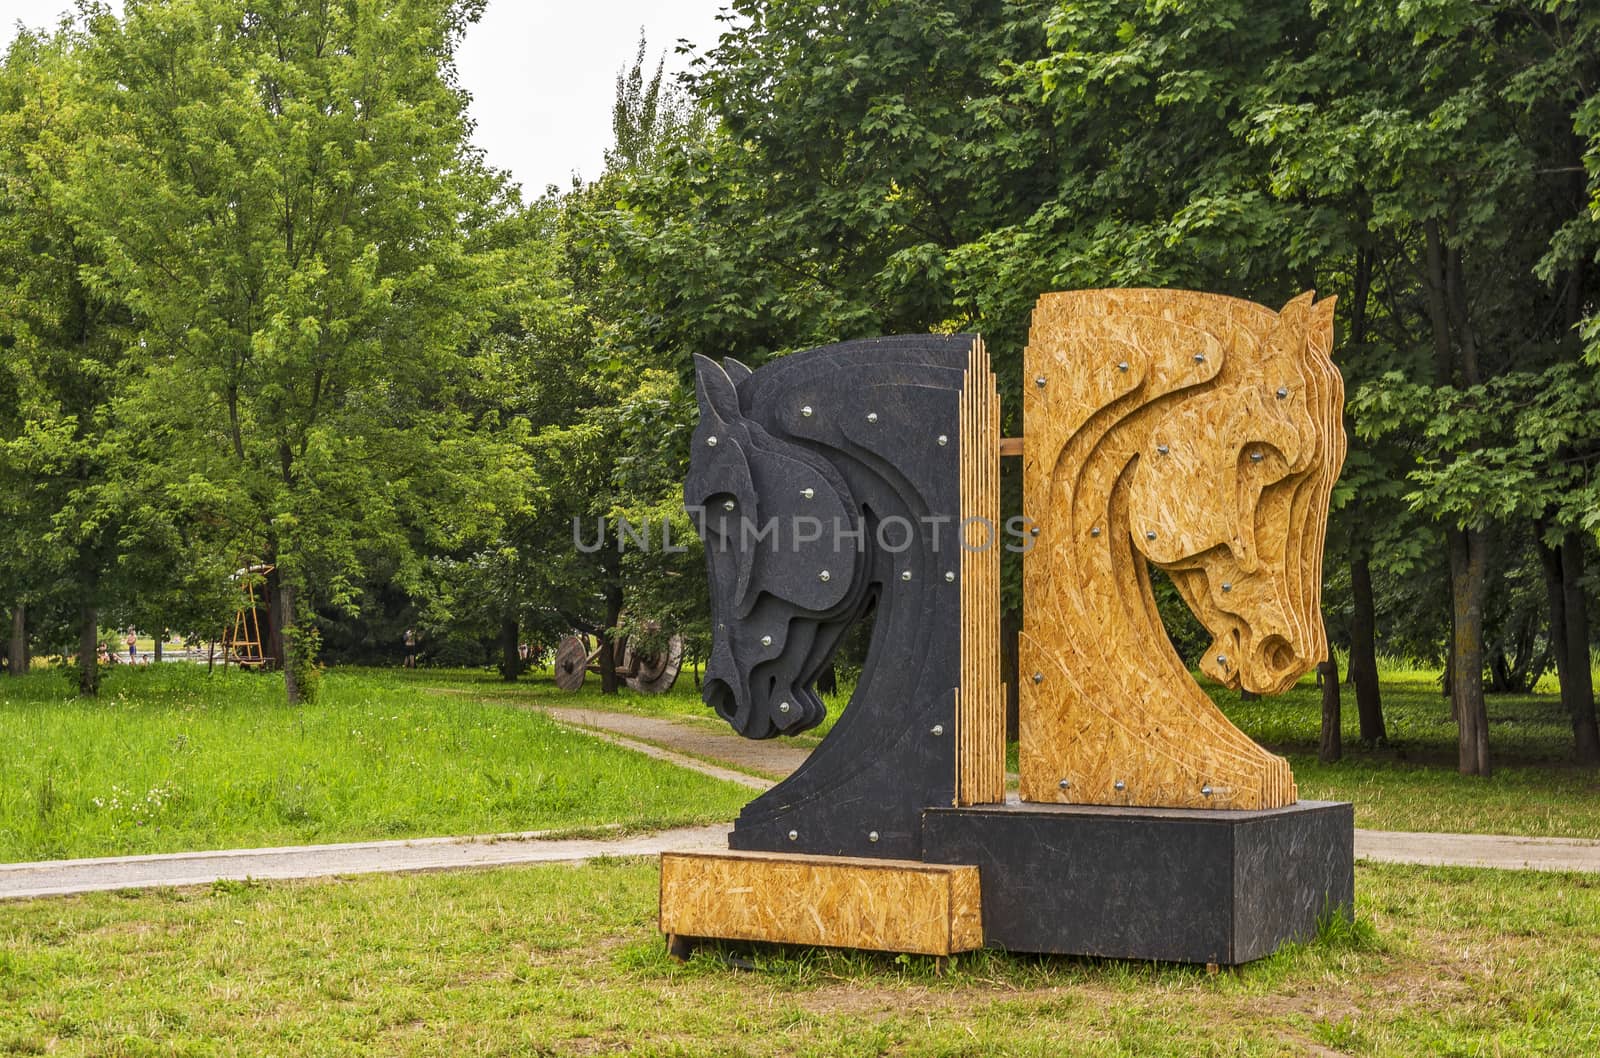 Sculpture made of plywood two chess pieces - black and white horses set in a city park